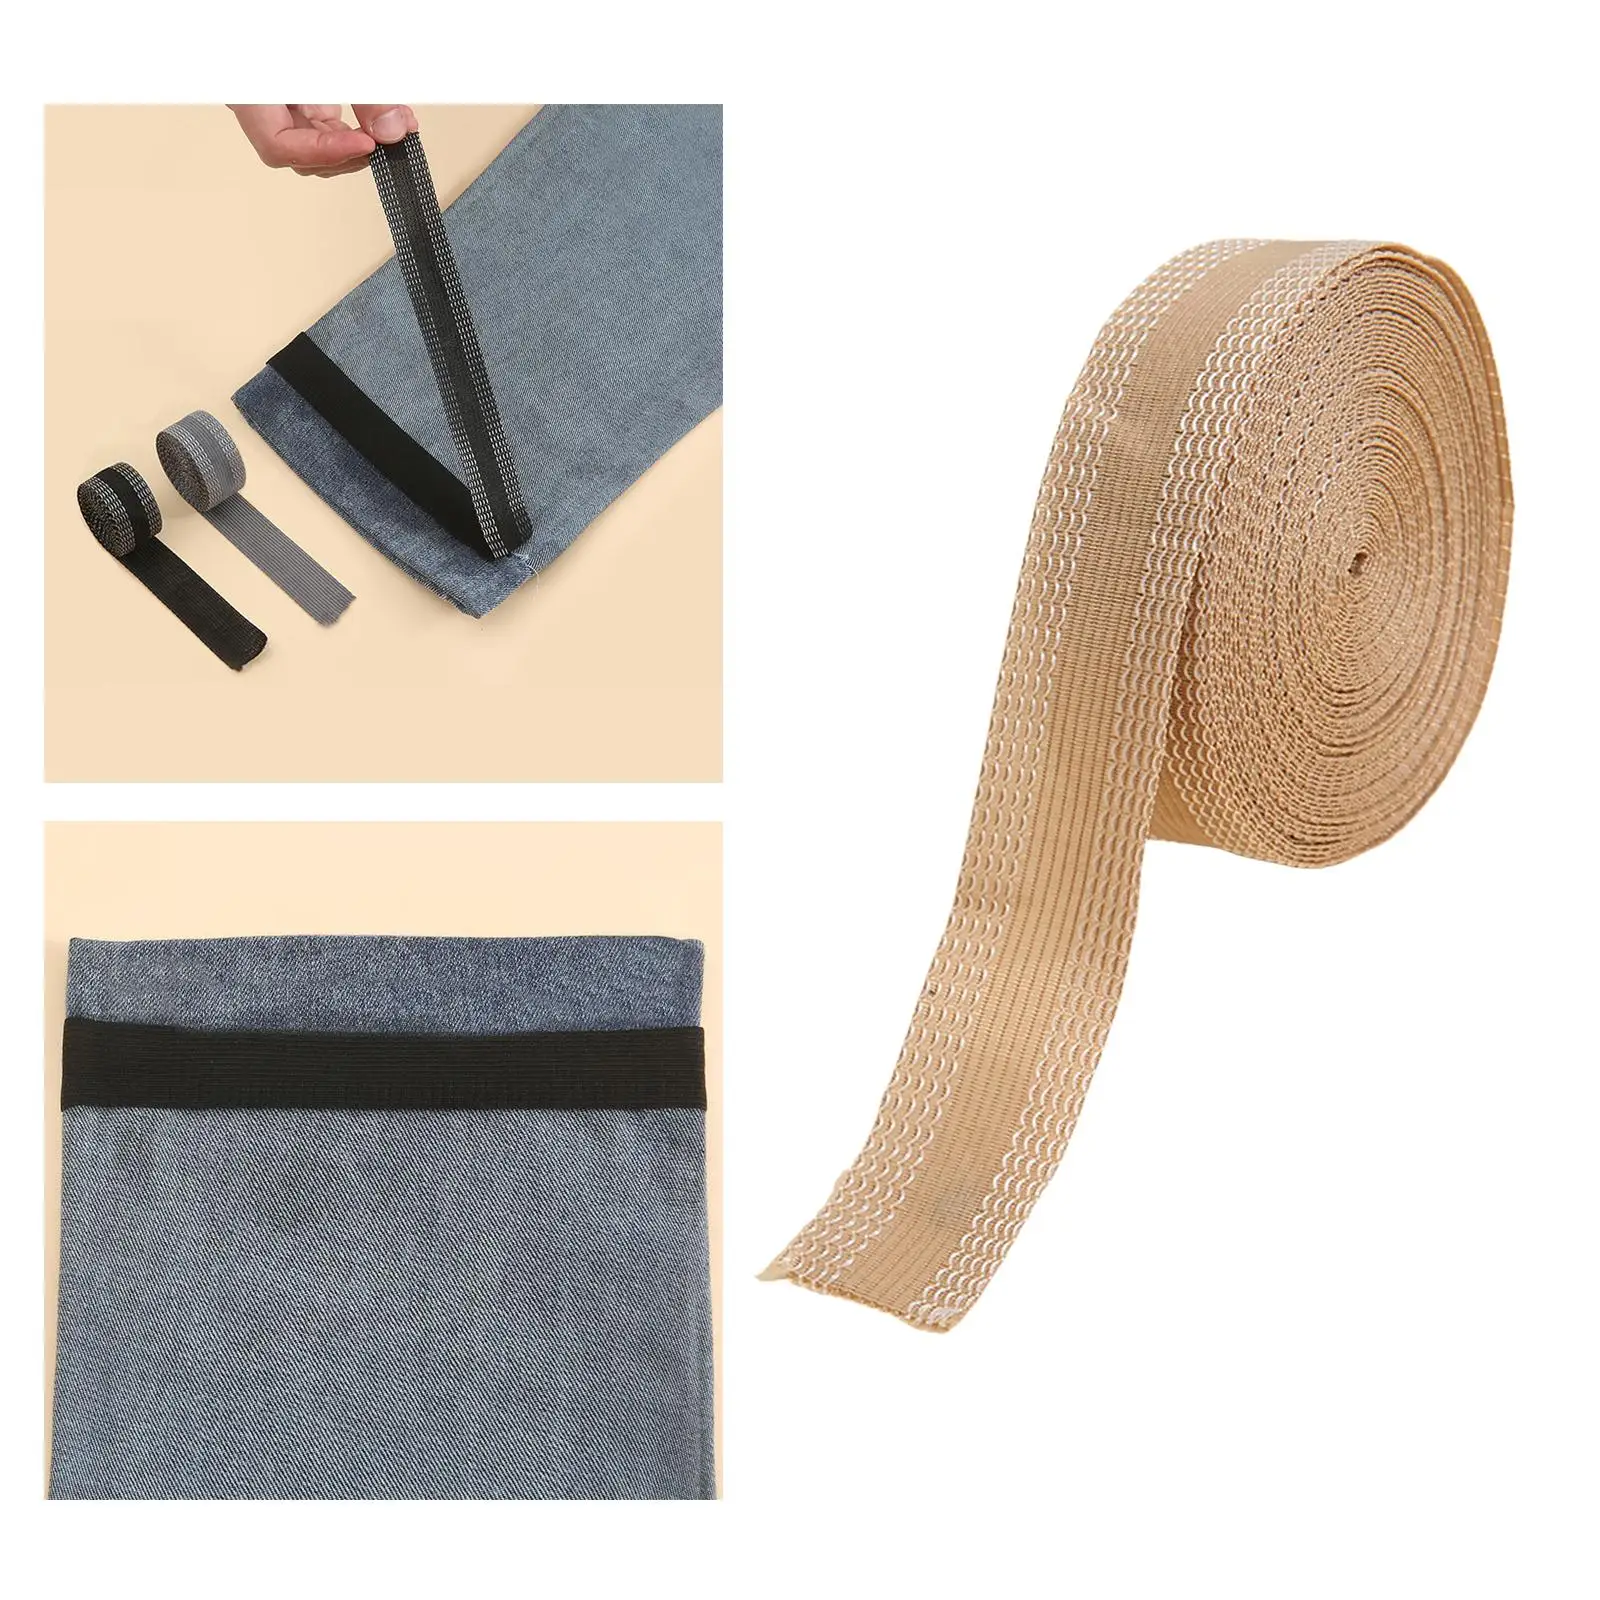 5M Pants Edge Shorten Hem Tape Self Adhesive Sewing Iron On Foot Presser Hemming Tape for Suit Pants Jeans Skirts Clothes